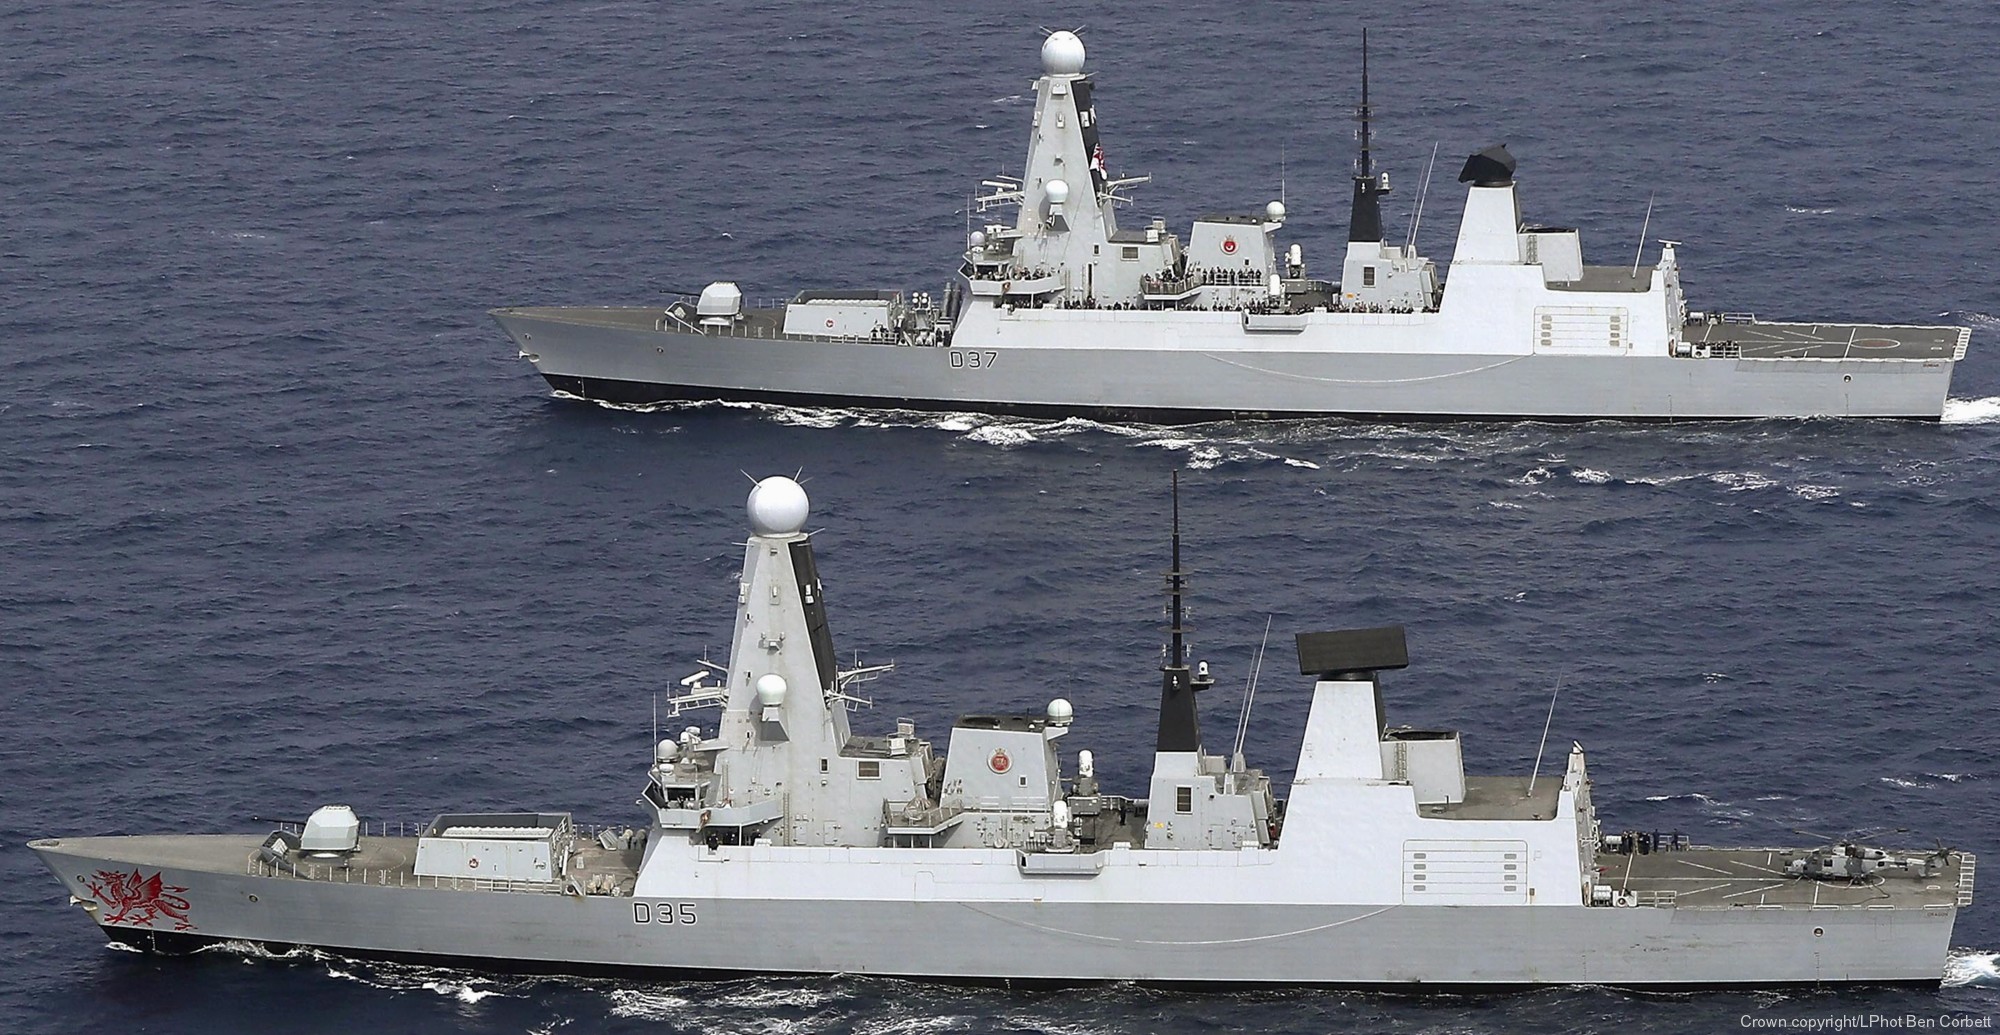 d35 hms dragon d-35 type 45 daring class guided missile destroyer ddg royal navy sea viper paams 40